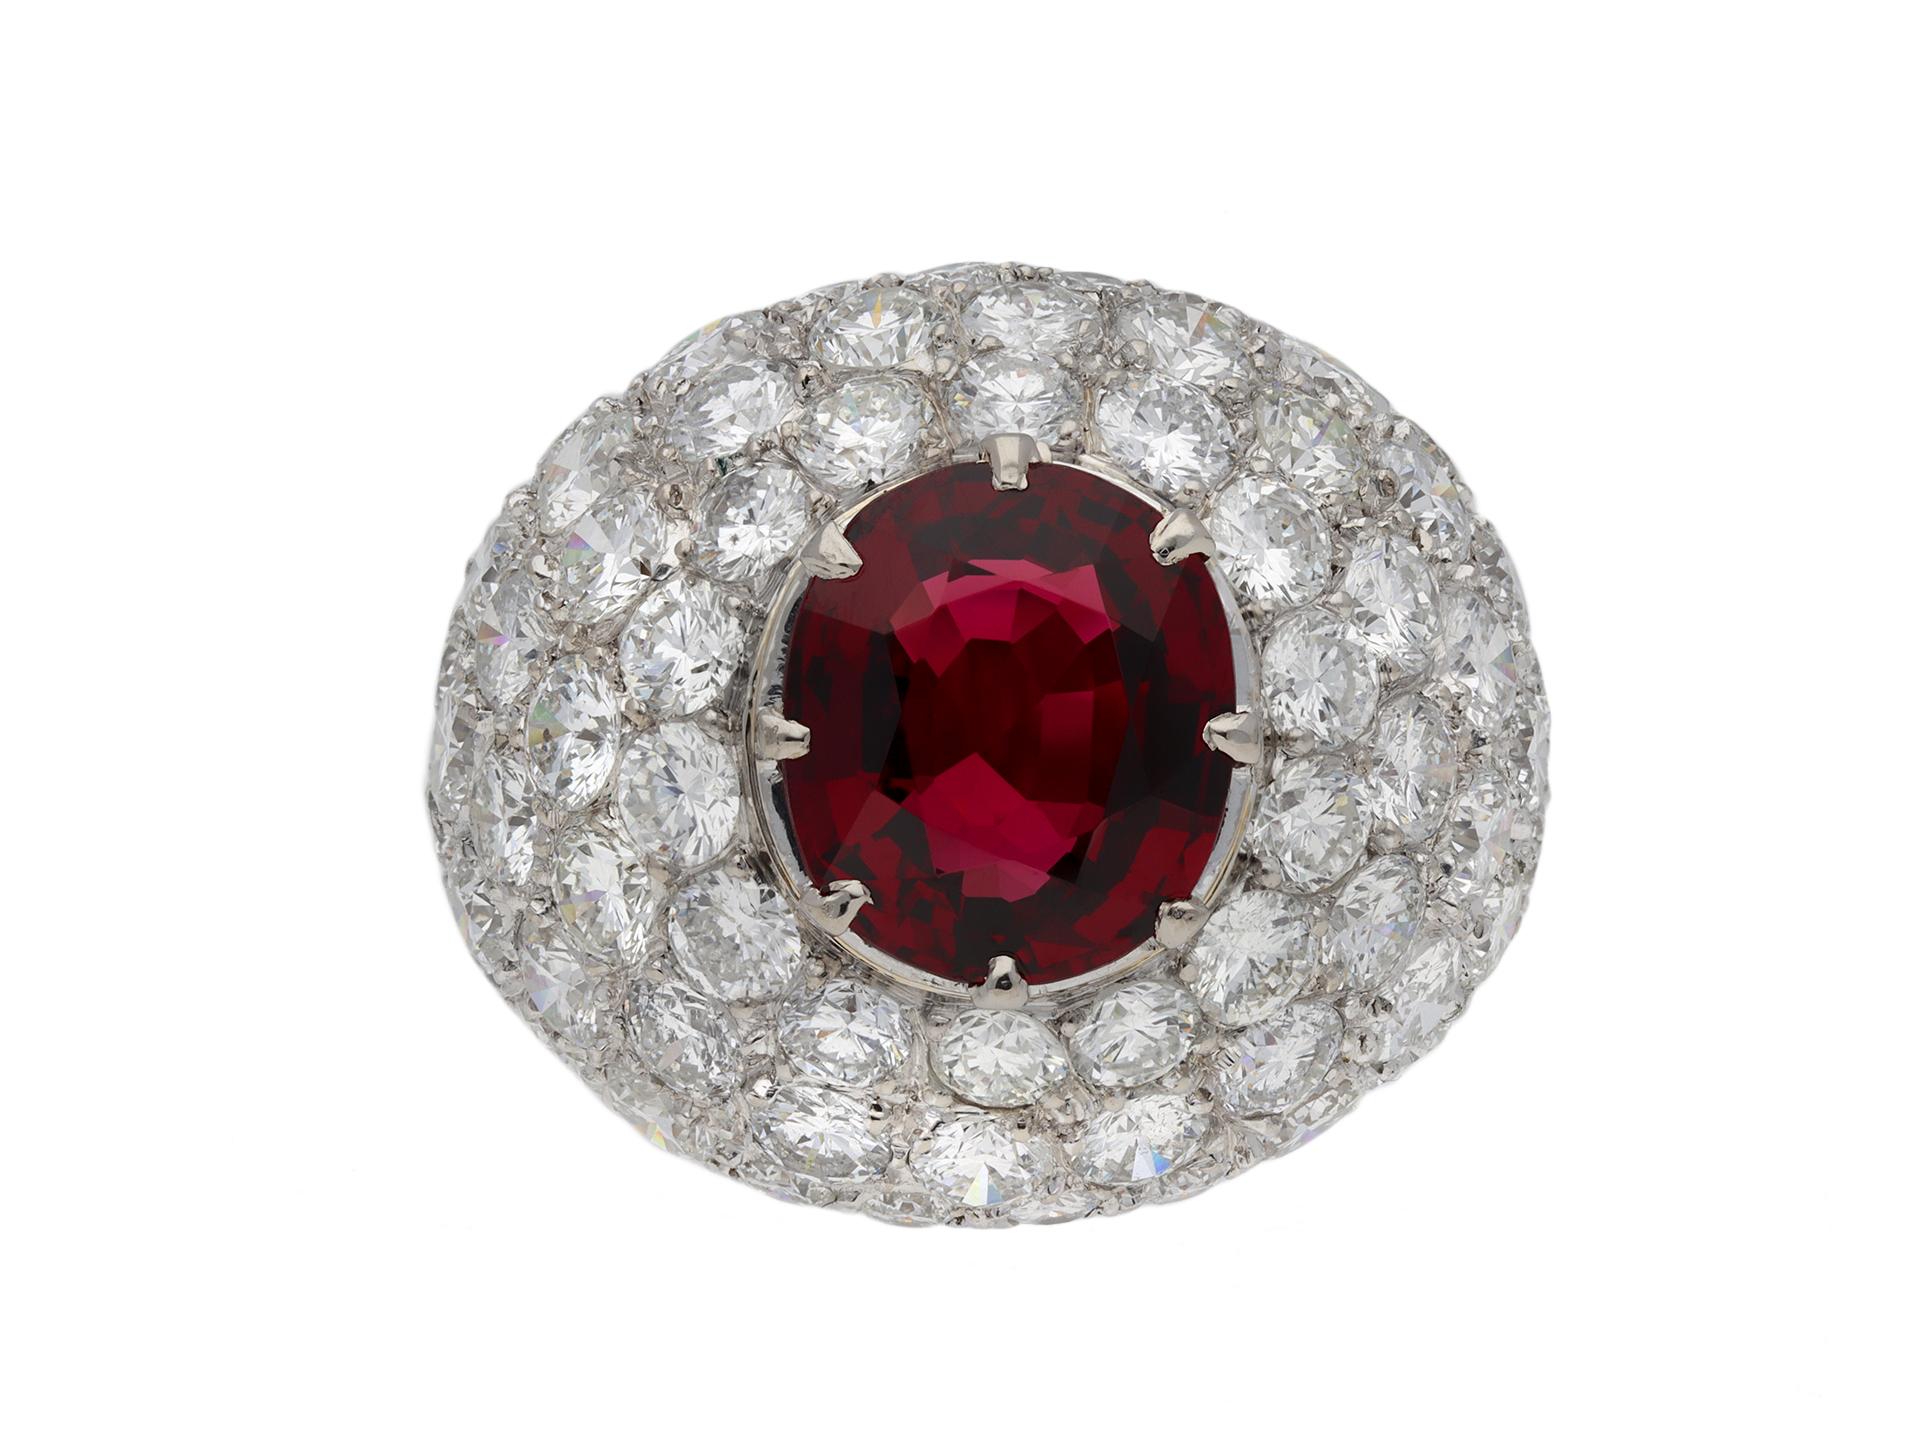 Ceylon spinel and diamond cocktail ring. Centrally set with a cushion shape old cut natural unenhanced spinel in an open back claw setting with an approximate weight of 3.40 carats, surrounded by seventy four round old cut diamonds in open back